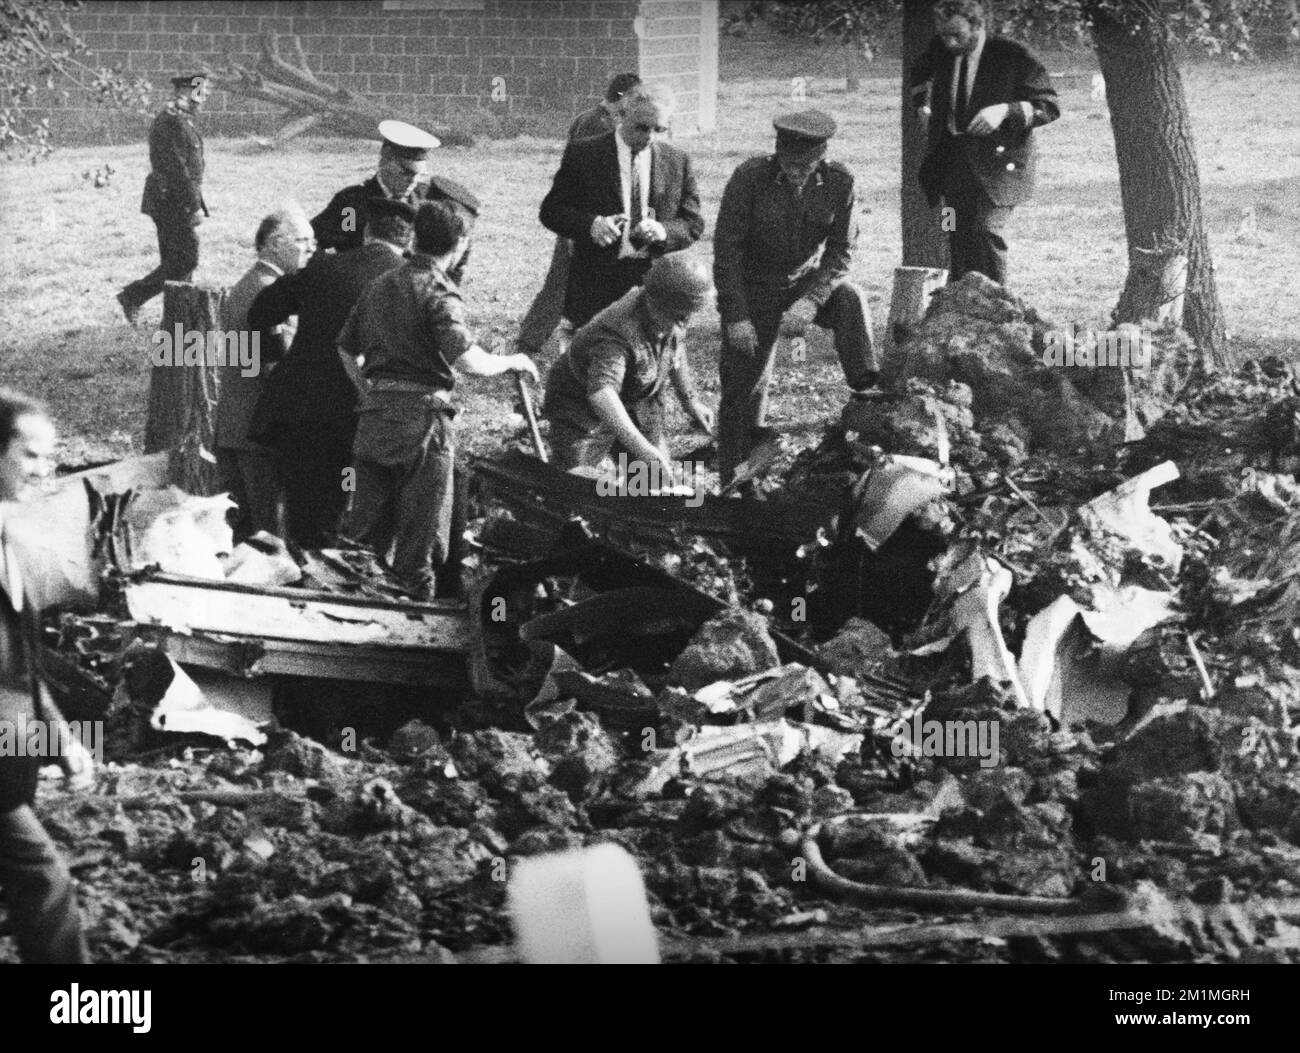 19711002 - TIELT, BELGIUM : (FILE) This file picture dated 2 October 1971 shows police and rescuers as they try to find victims from the wreckage of the british Vanguard Turboprop airliner that crashed in a field of Aarsele - Tielt (near Ghent) on October 2, 1971. The British European Airways (BEA) plane was carrying 63 persons on a flight between London and Salzburg (Austria). 38 people died in the tragedy. BELGA PHOTO ARCHIVES Stock Photo